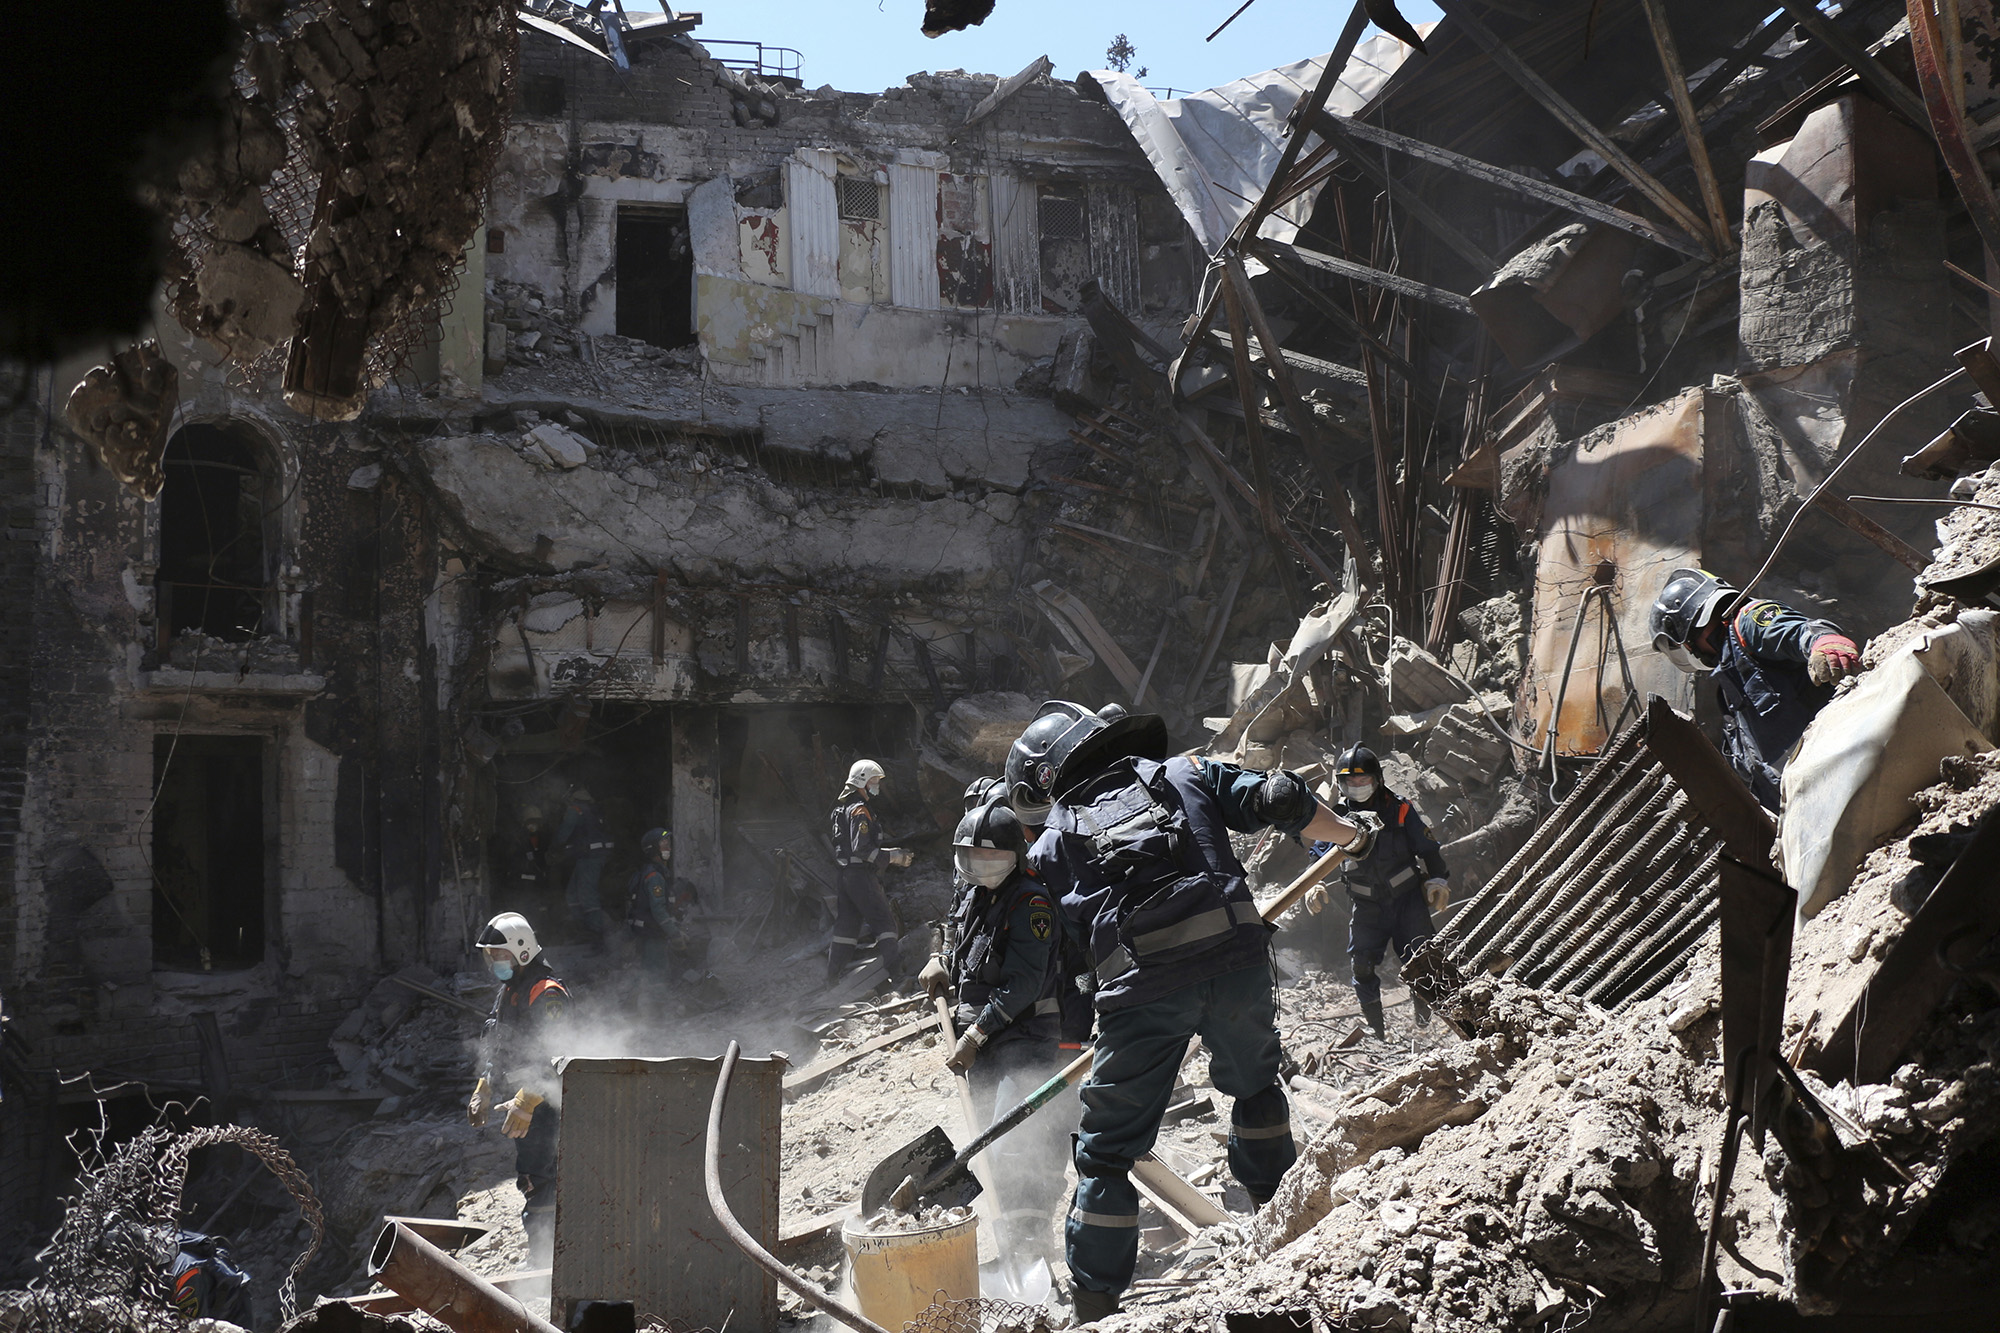 Donetsk People Republic Emergency Situations Ministry employees clear rubble at the side of the damaged Mariupol Theater in Mariupol, Ukraine, on May 12.